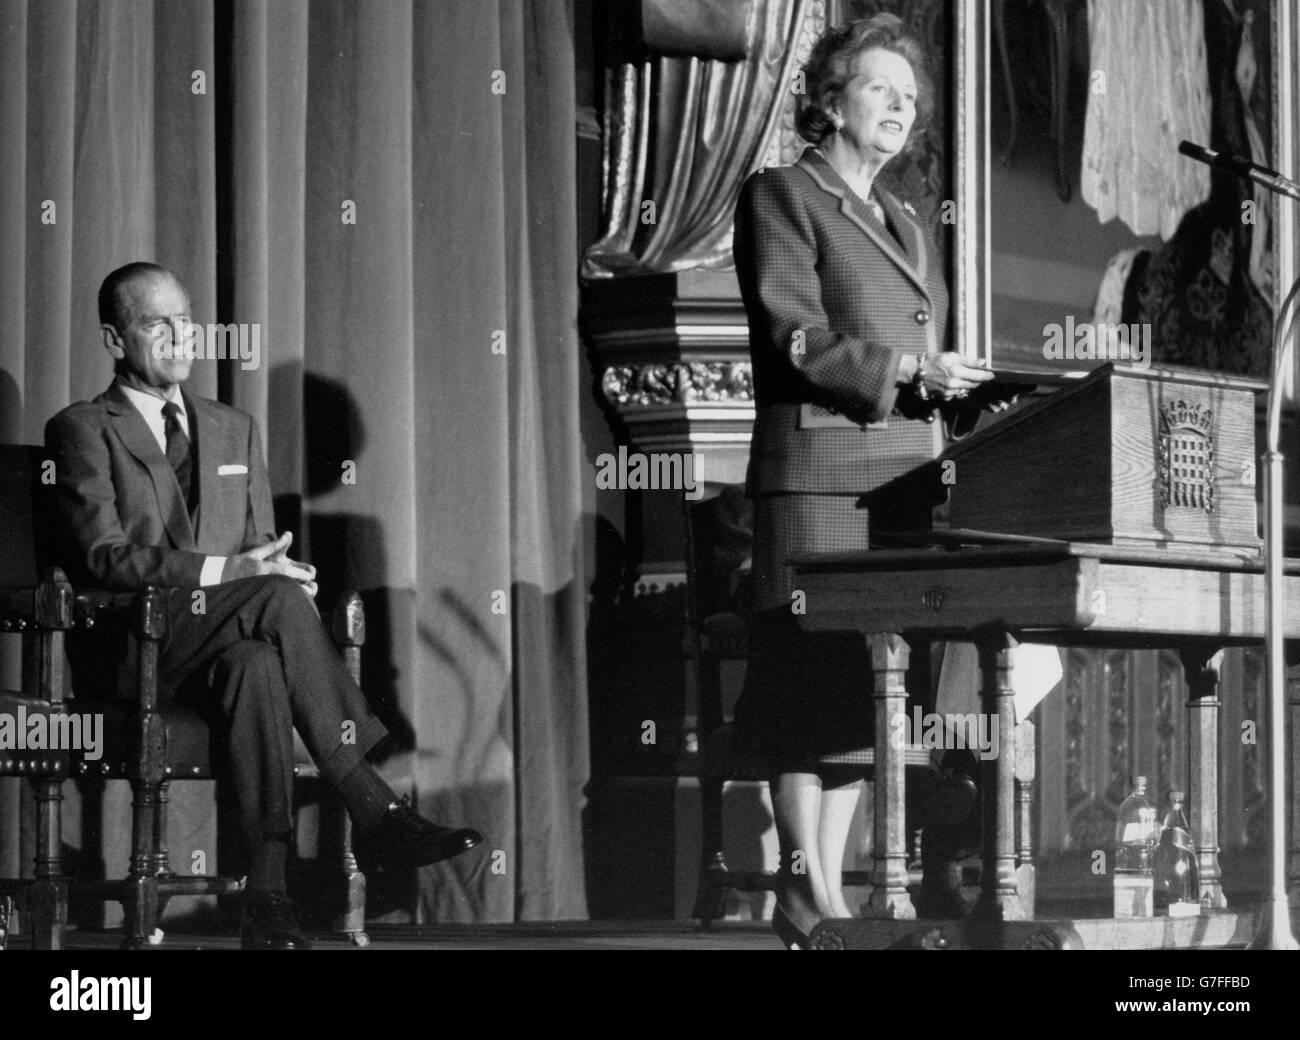 The Prime Minister, Margaret Thatcher, delivering the Parliamentary and Scientific Committee's 50th anniversary lecture in the Lords. Listening is the Duke of Edinburgh, who presided. *Scanned low-res from print, high-res available on request* Stock Photo